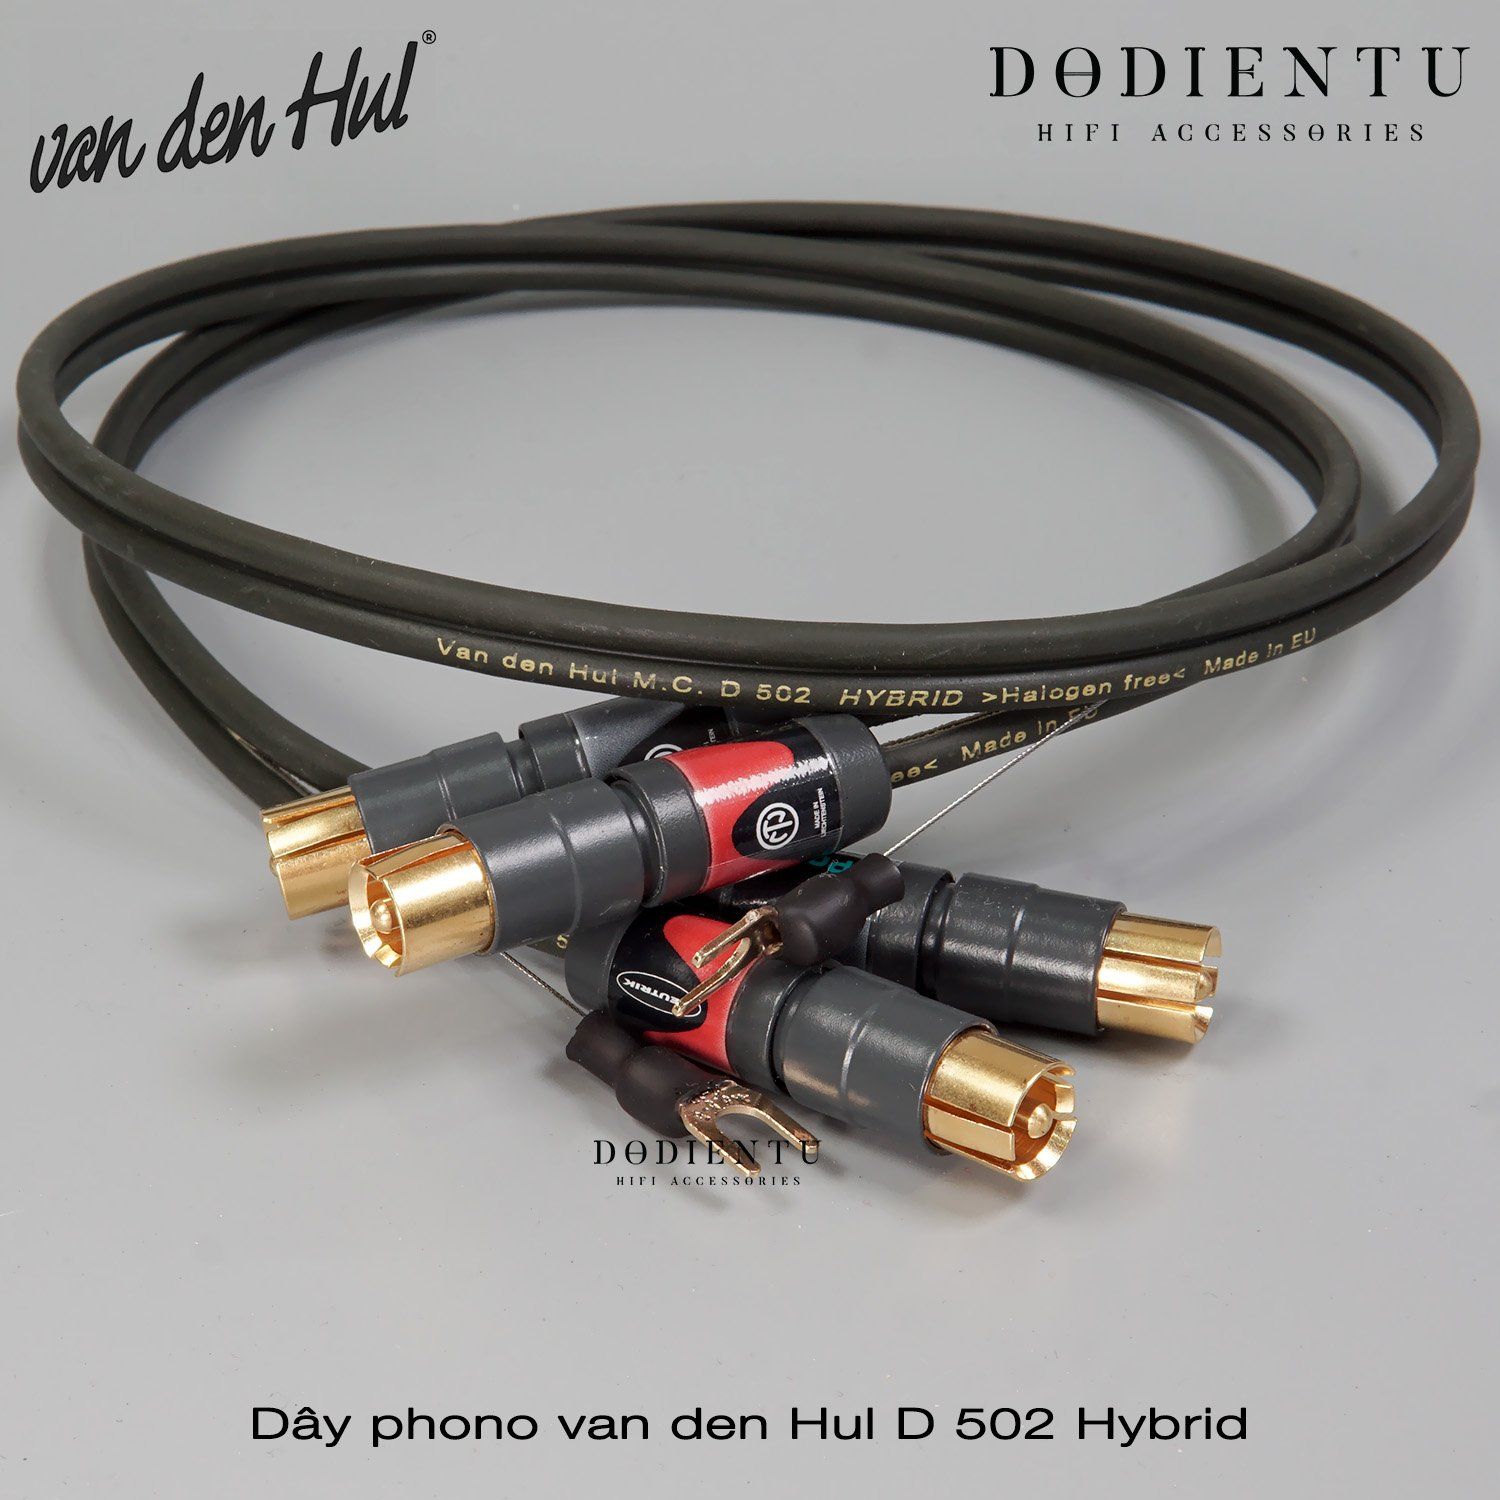 van den hul - The D 502 Hybrid - Phono Cable